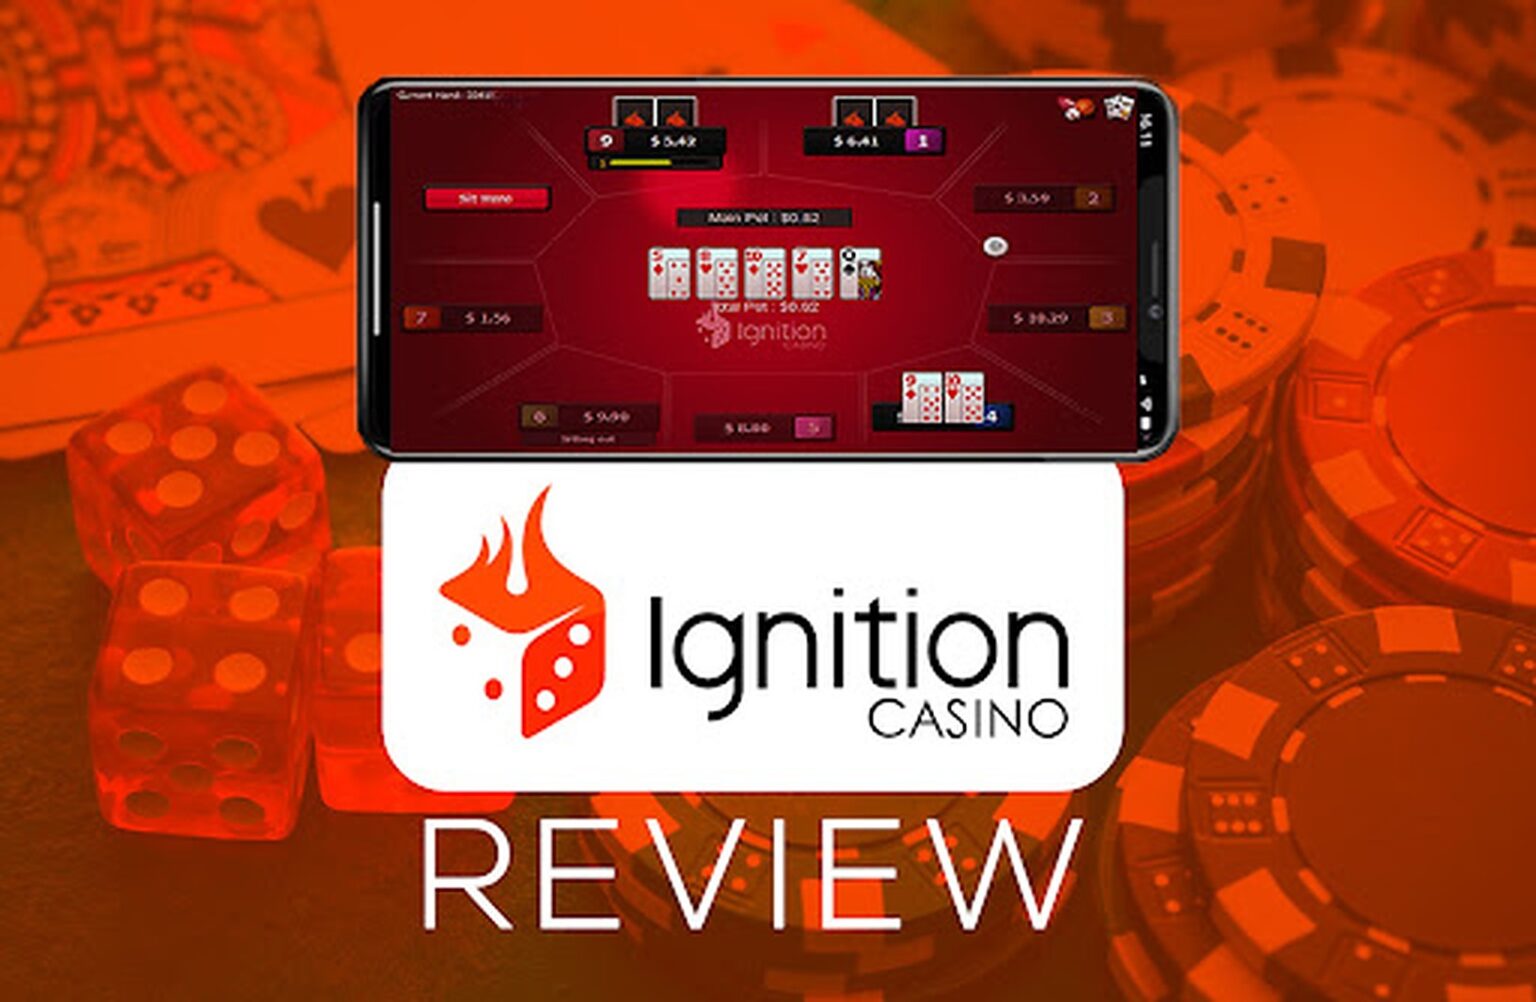 You want to play casino games and this site Ignition keeps popping up as the top suggestion. Is it any good? Here’s what our casino experts have to say.